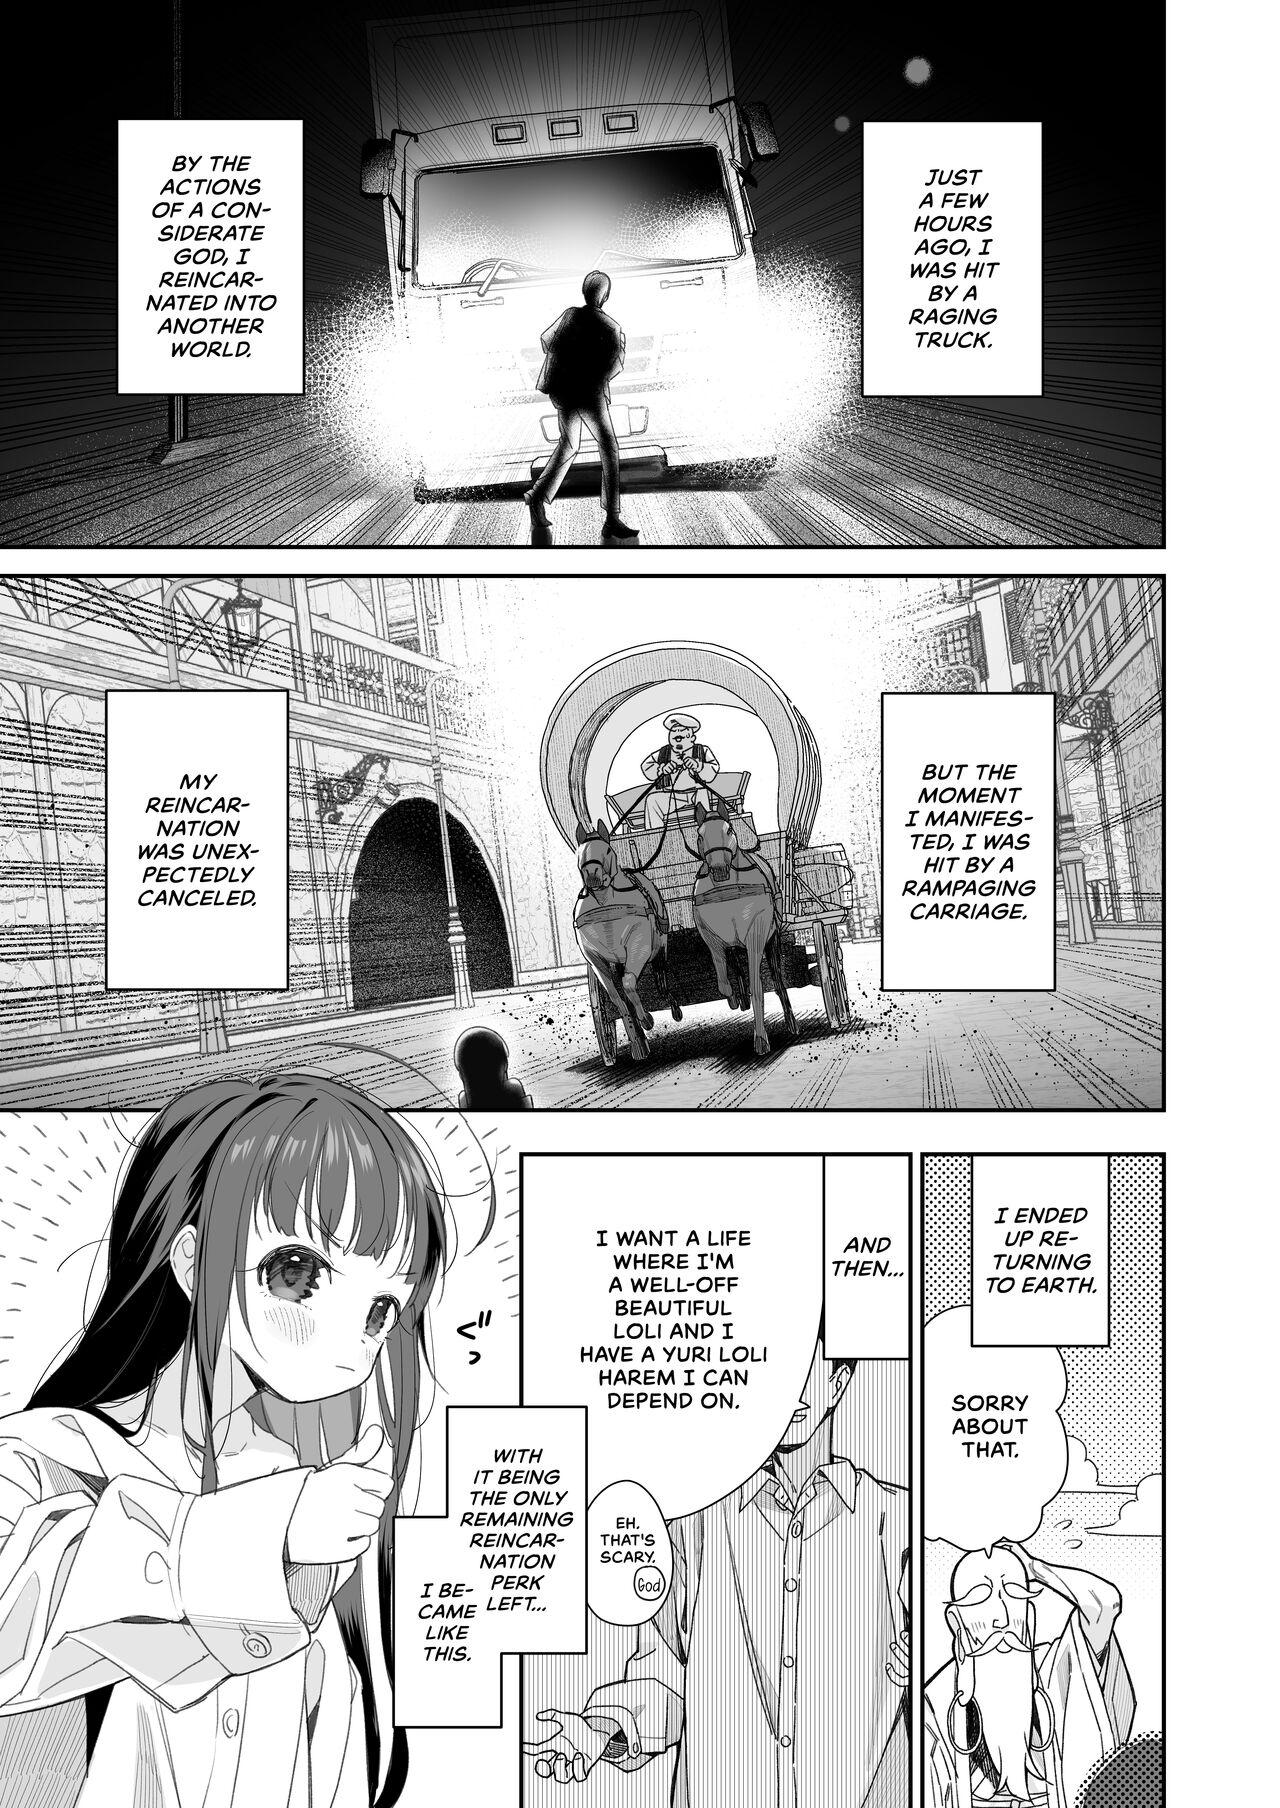 Slut Porn [Asunaro Neat. (Ronna)] TS Loli Oji-san no Bouken Onanie Hen | The Adventures of an Old Man Who Was Gender-Swapped Into a Loli ~Masturbation Chapter~ [English] [CulturedCommissions] [Digital] - Original Whooty - Page 4